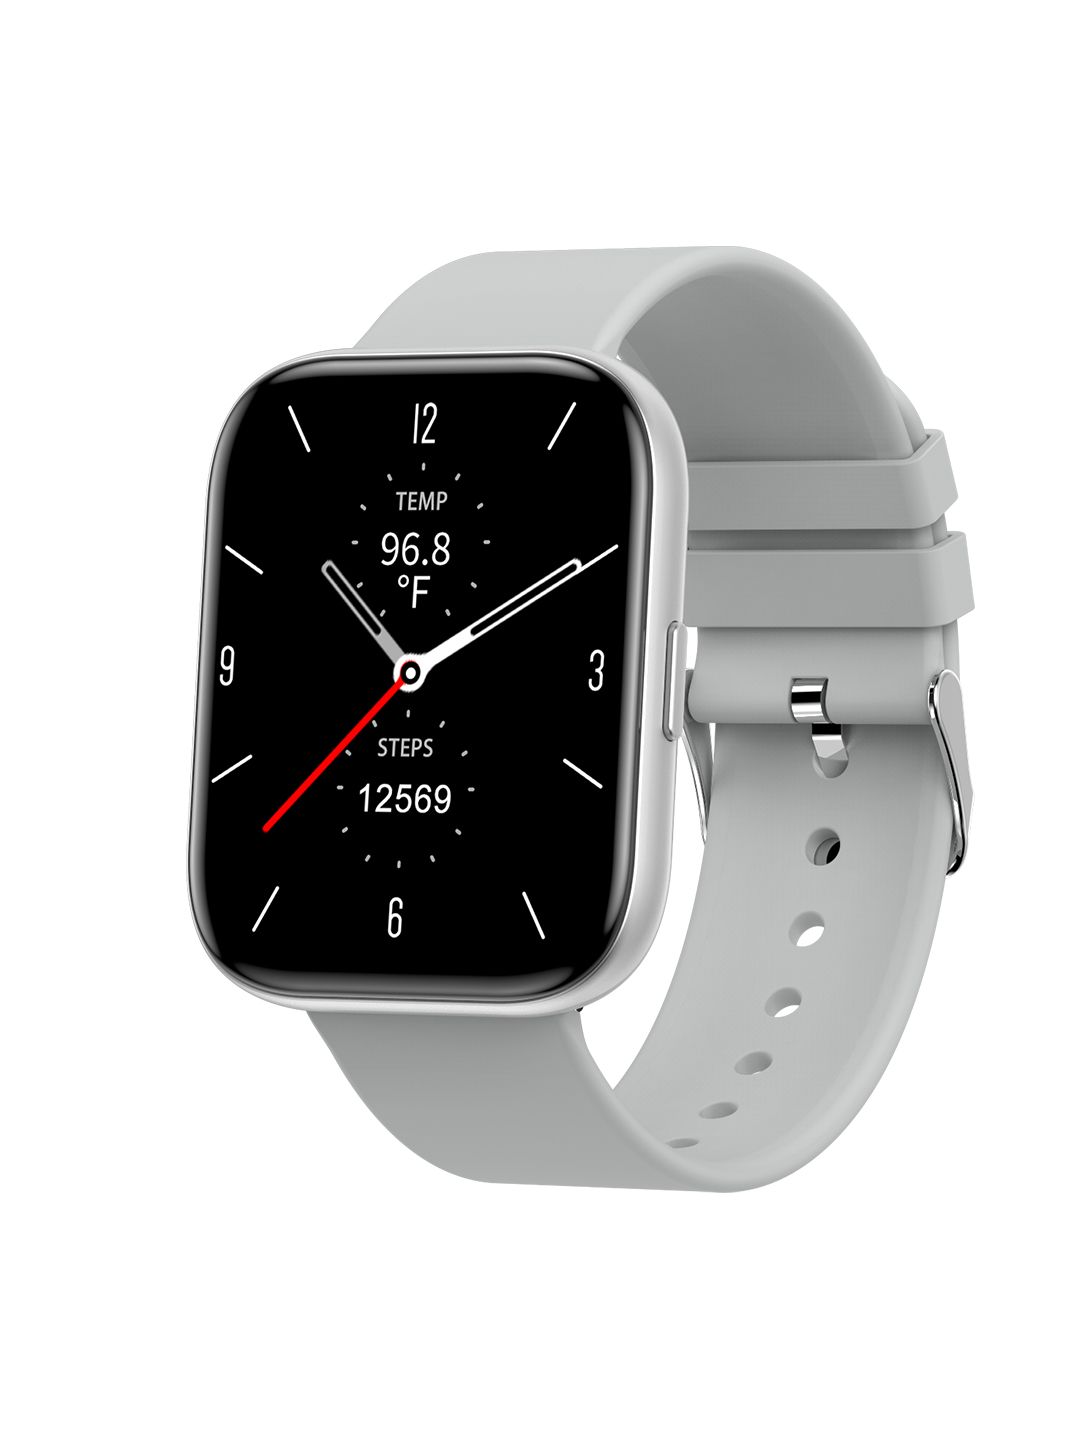 Fire-Boltt Mercury Unisex 1.7 Temperature & Spo2 Smartwatch 06BSWAAY - Grey Price in India